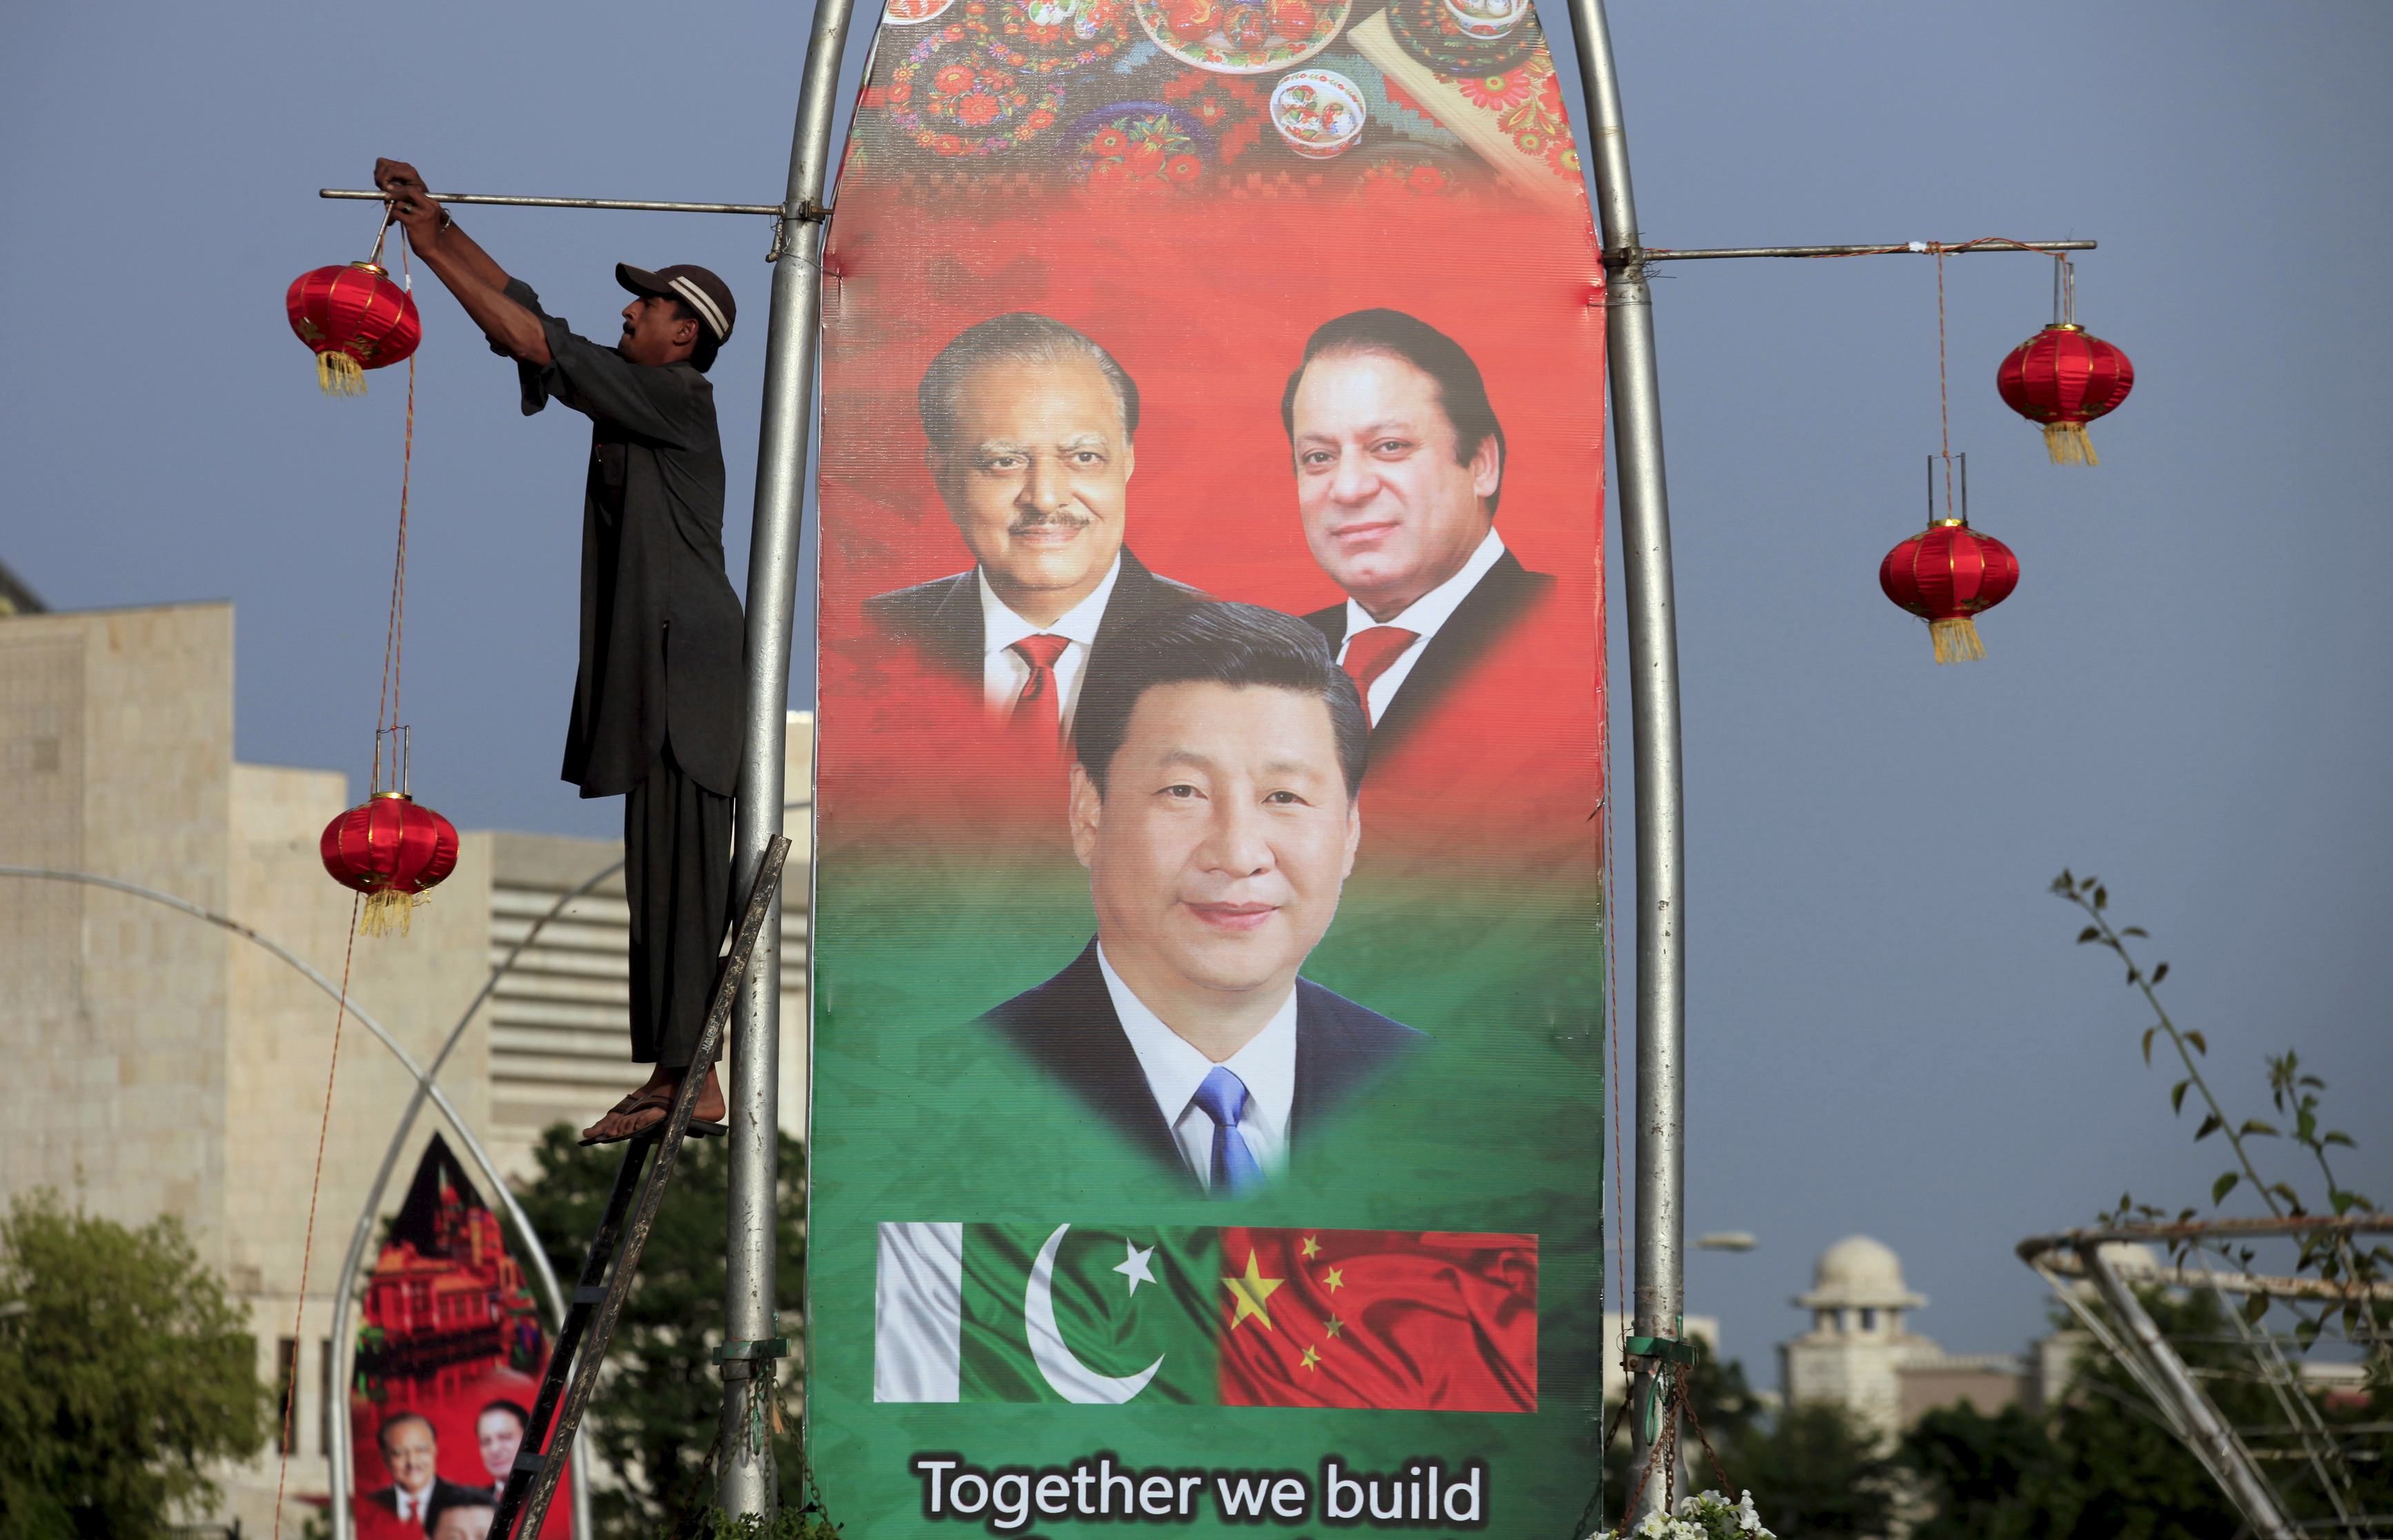 A man hangs decorations on a pole next to a banner showing, clockwise from top left, Pakistani President Mamnoon Hussain, Pakistani Prime Minister Nawaz Sharif and  Chinese President Xi Jinping, on April 19, 2015, ahead of Xi's visit to Islamabad (Faisal Mahmood—Reuters)